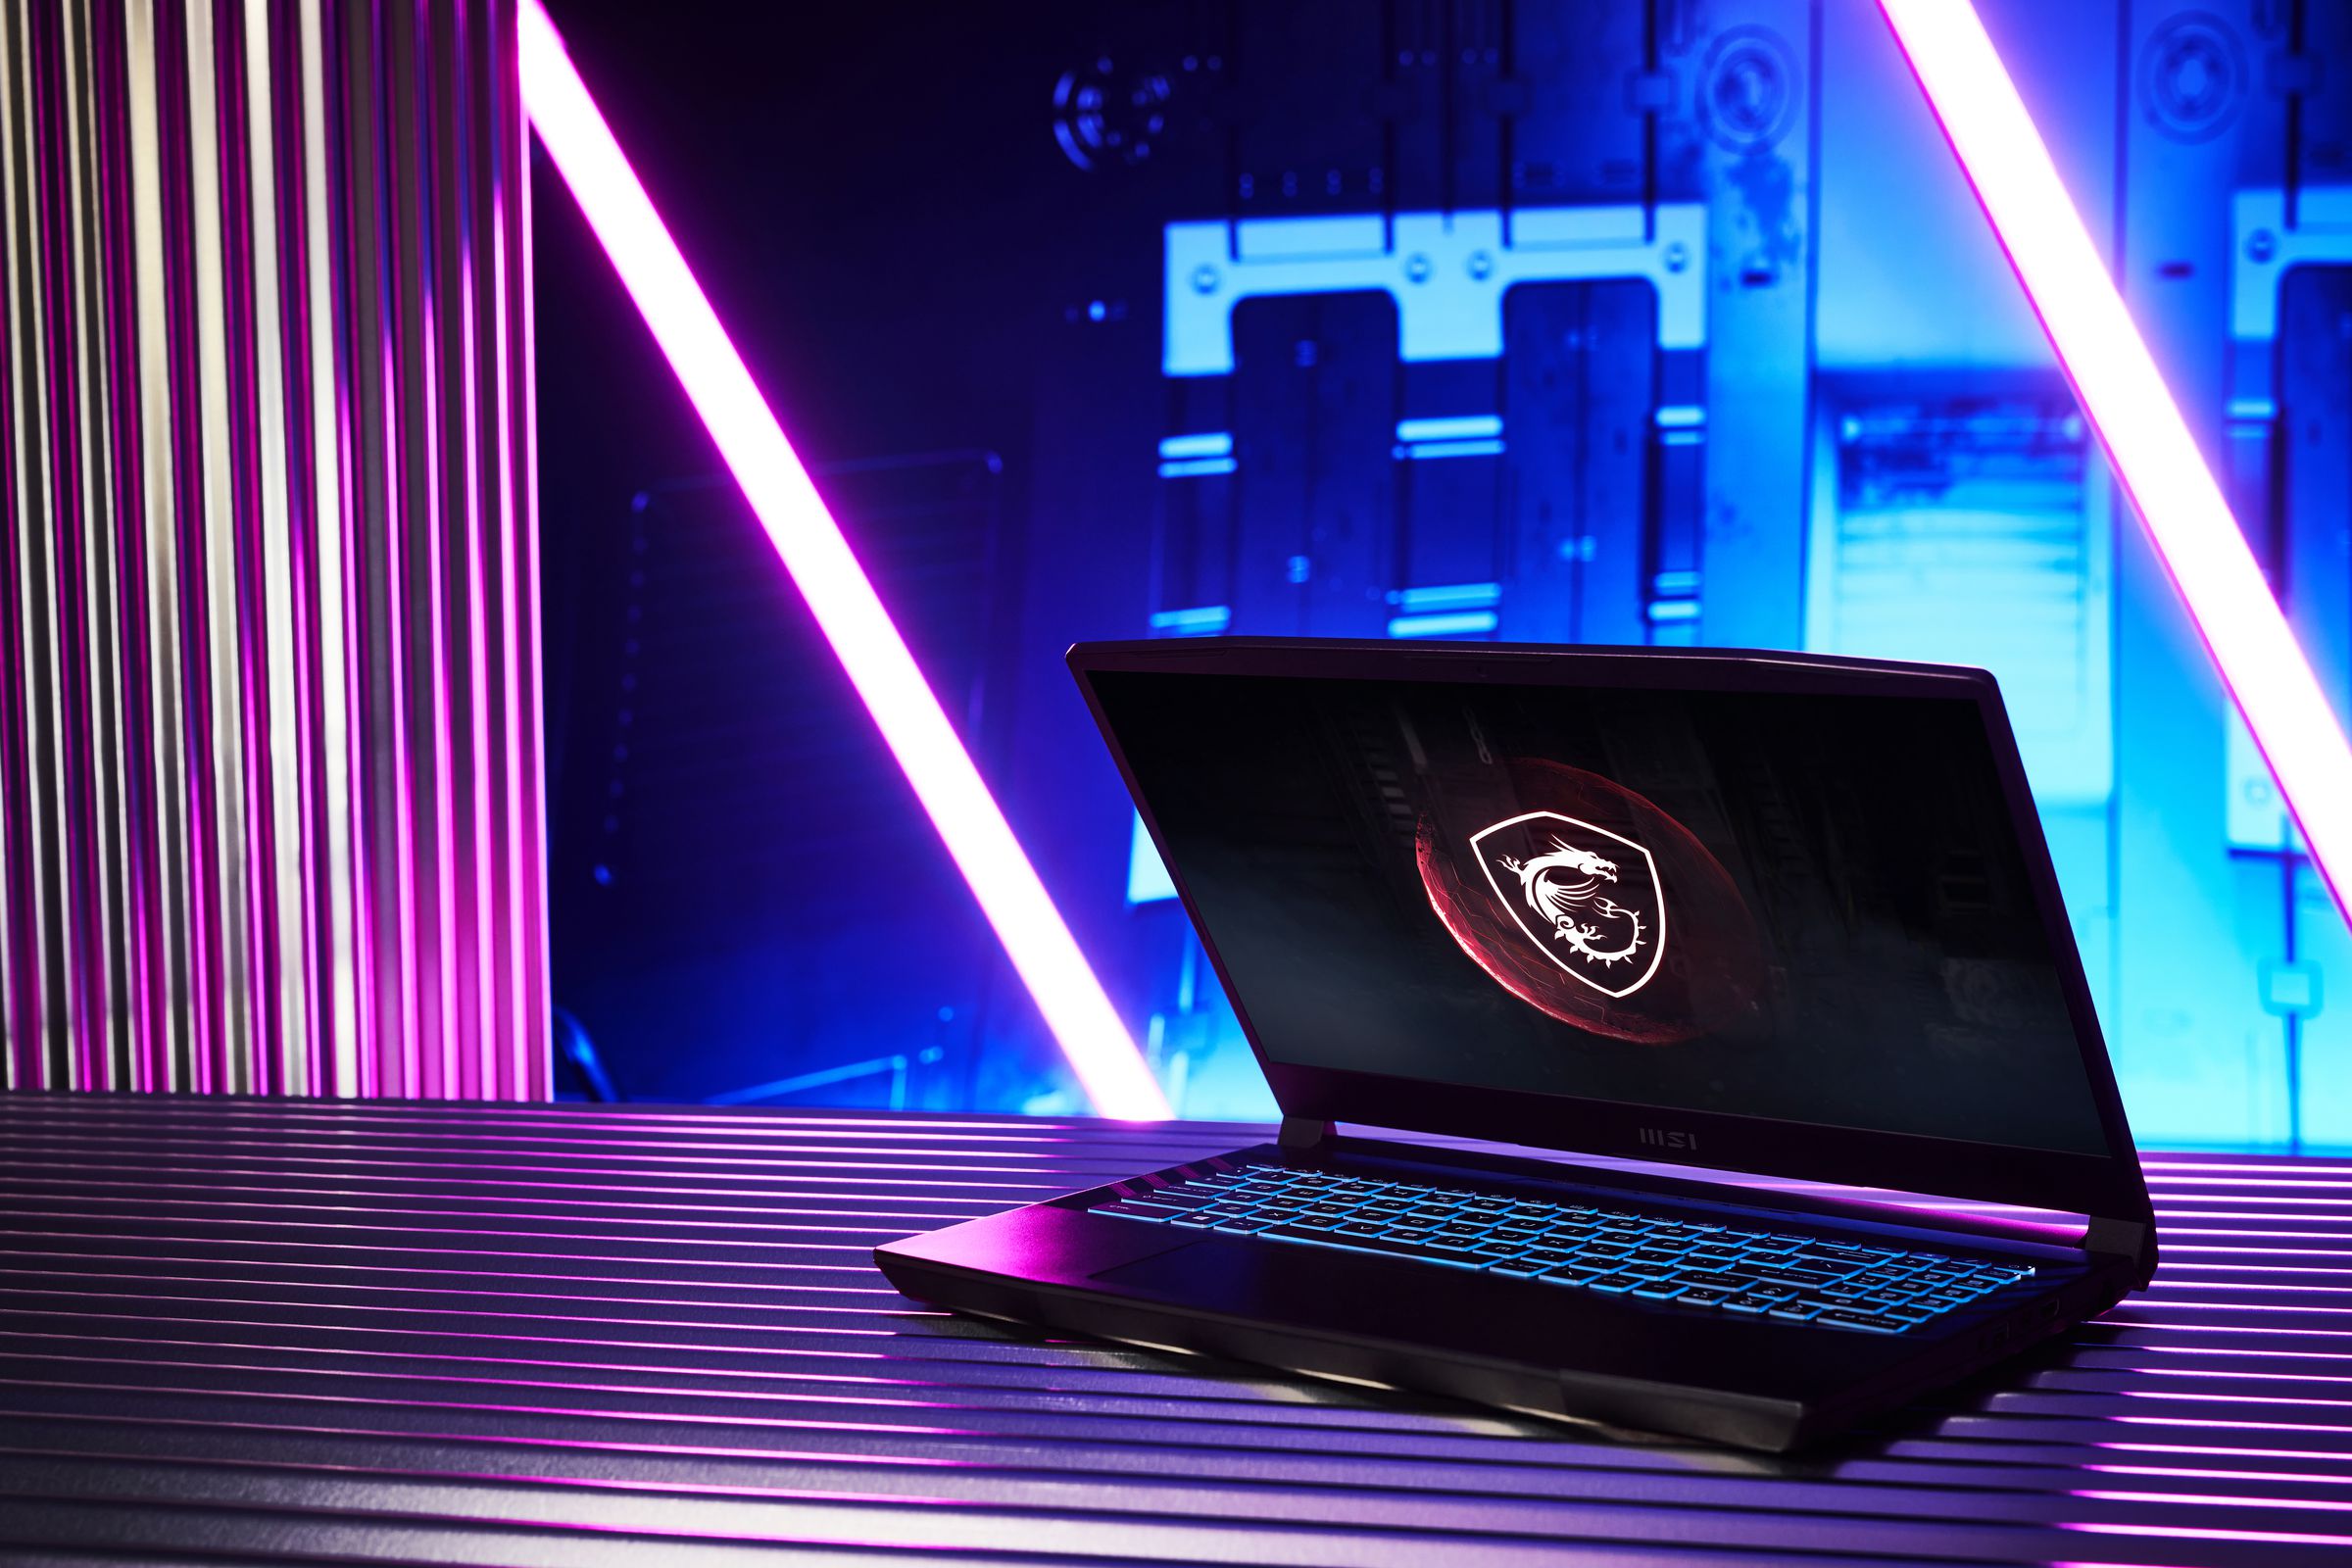 The MSI GL66 Pulse half open on a table, with black and purple lights in the background. The screen displays the MSI dragon-shield logo on a black background.